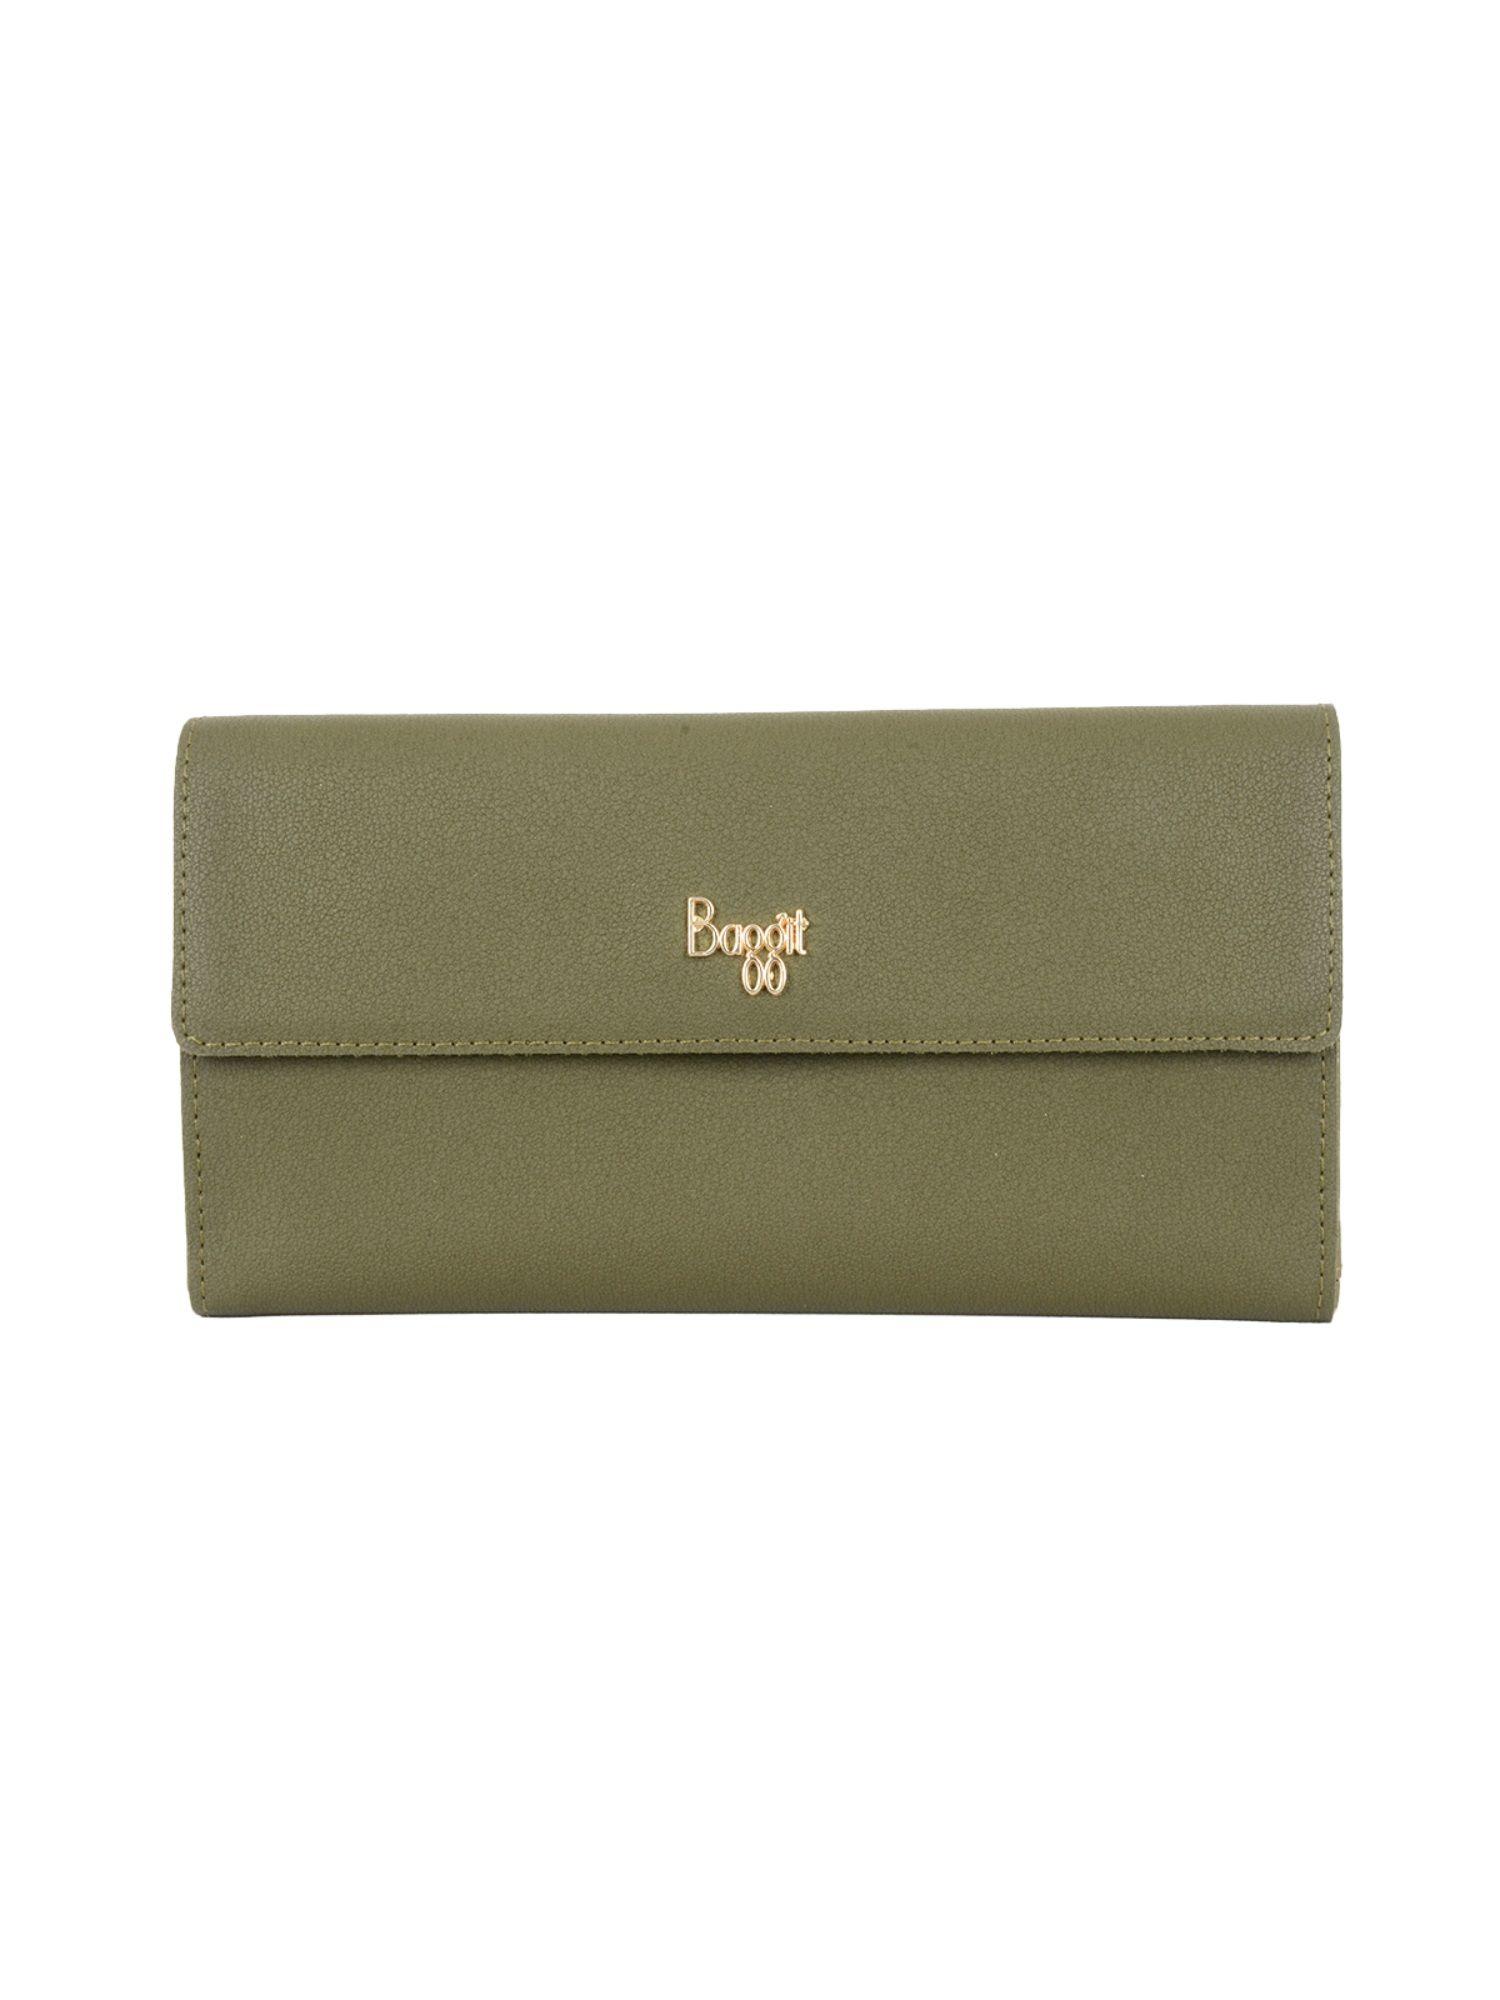 jeet extra large green 3 fold wallet